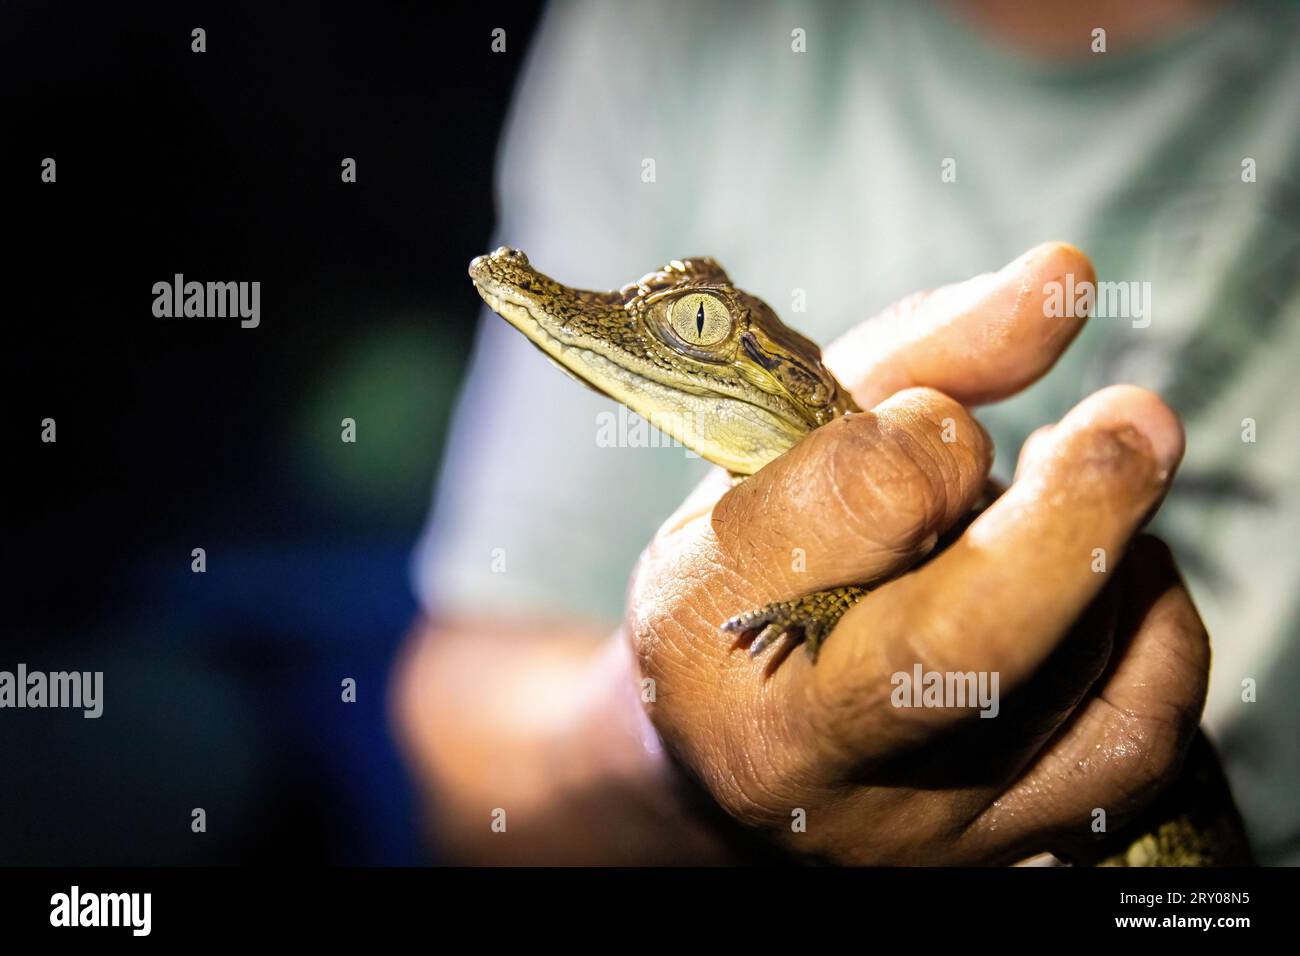 Baby caiman reptile holding at night from amazon jungle tour Stock Photo